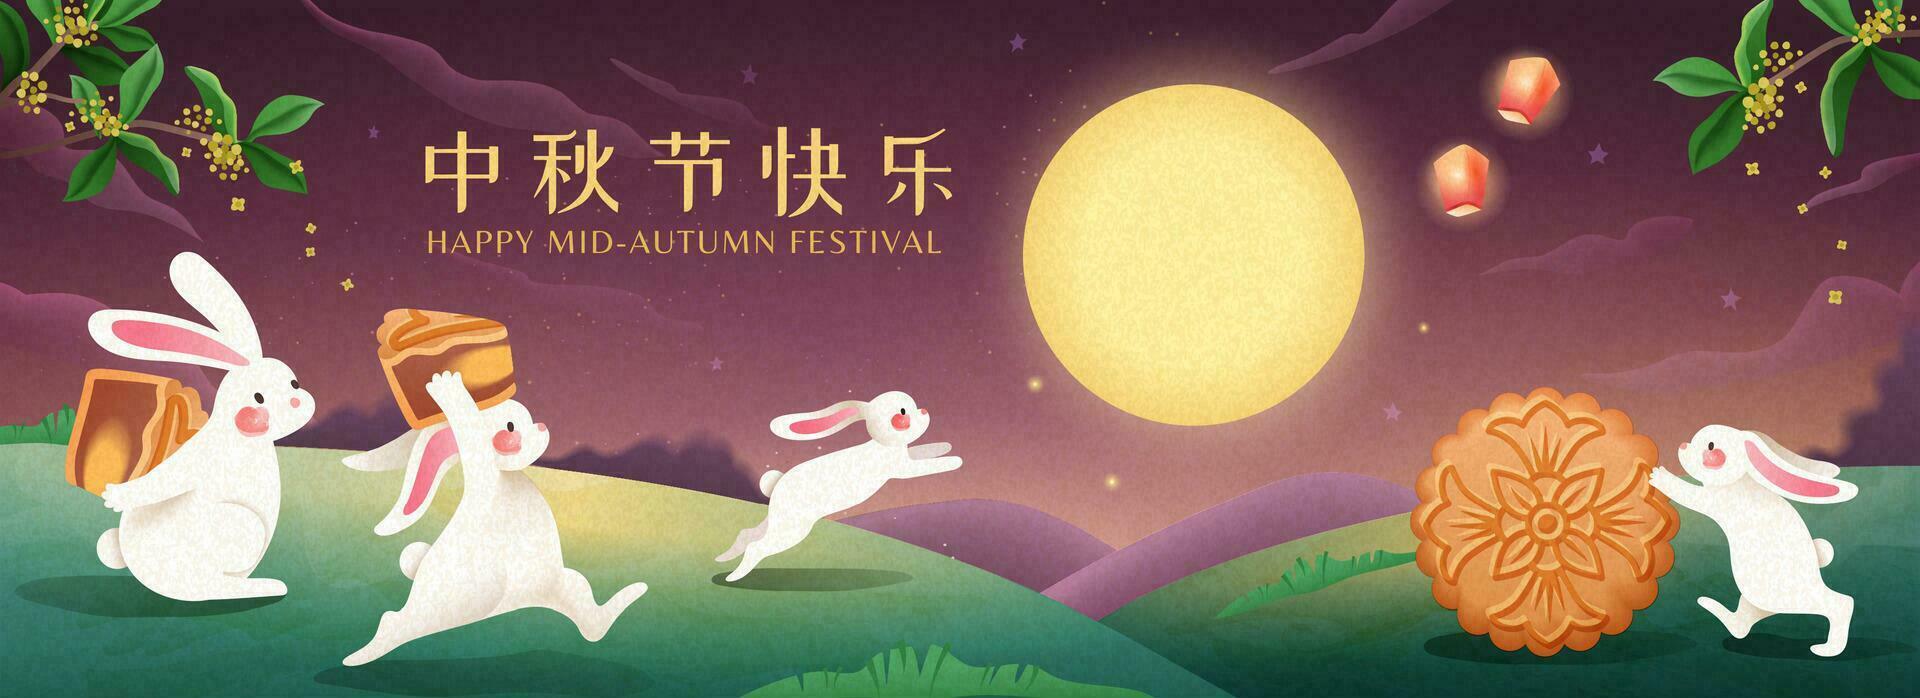 Cute Mid autumn festival banner with jade rabbit carrying mooncake and admiring the full moon, Happy holiday written in Chinese words vector